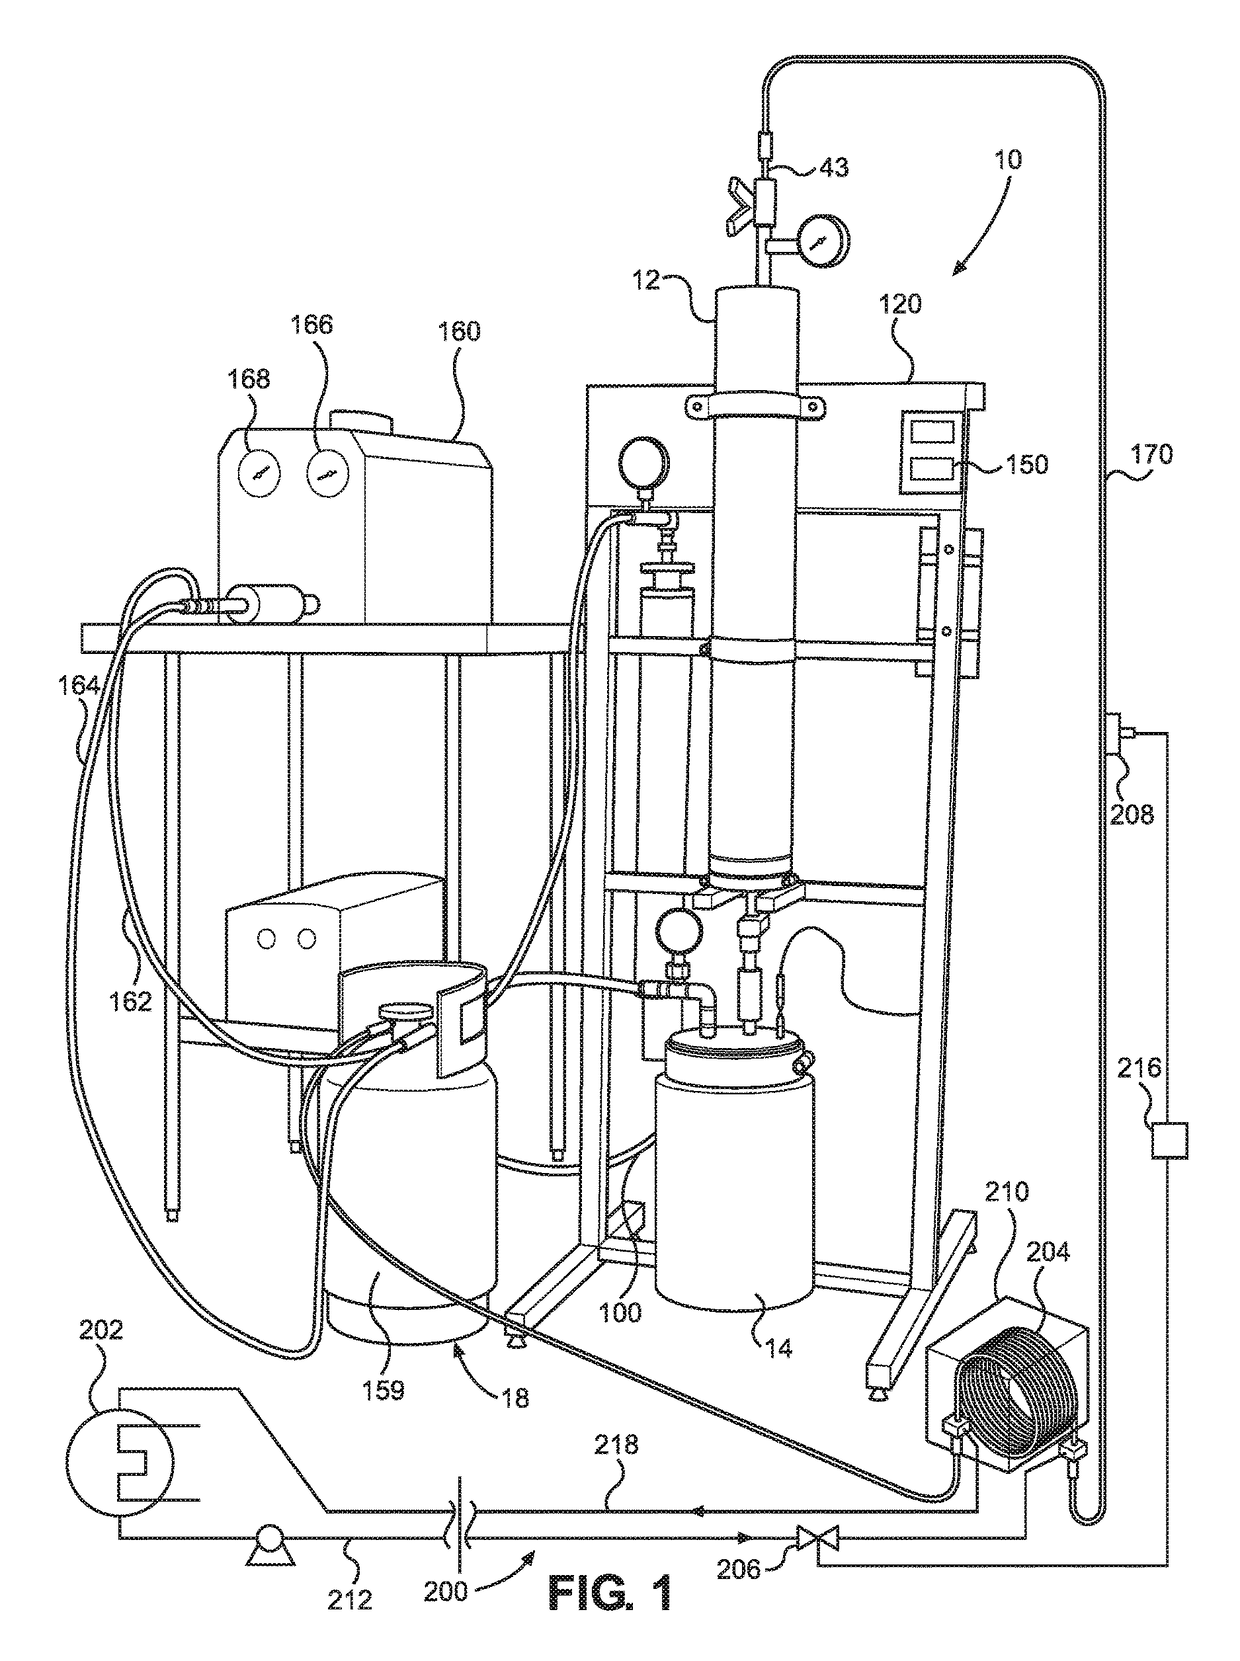 Apparatus for extracting oil from oil-bearing plants